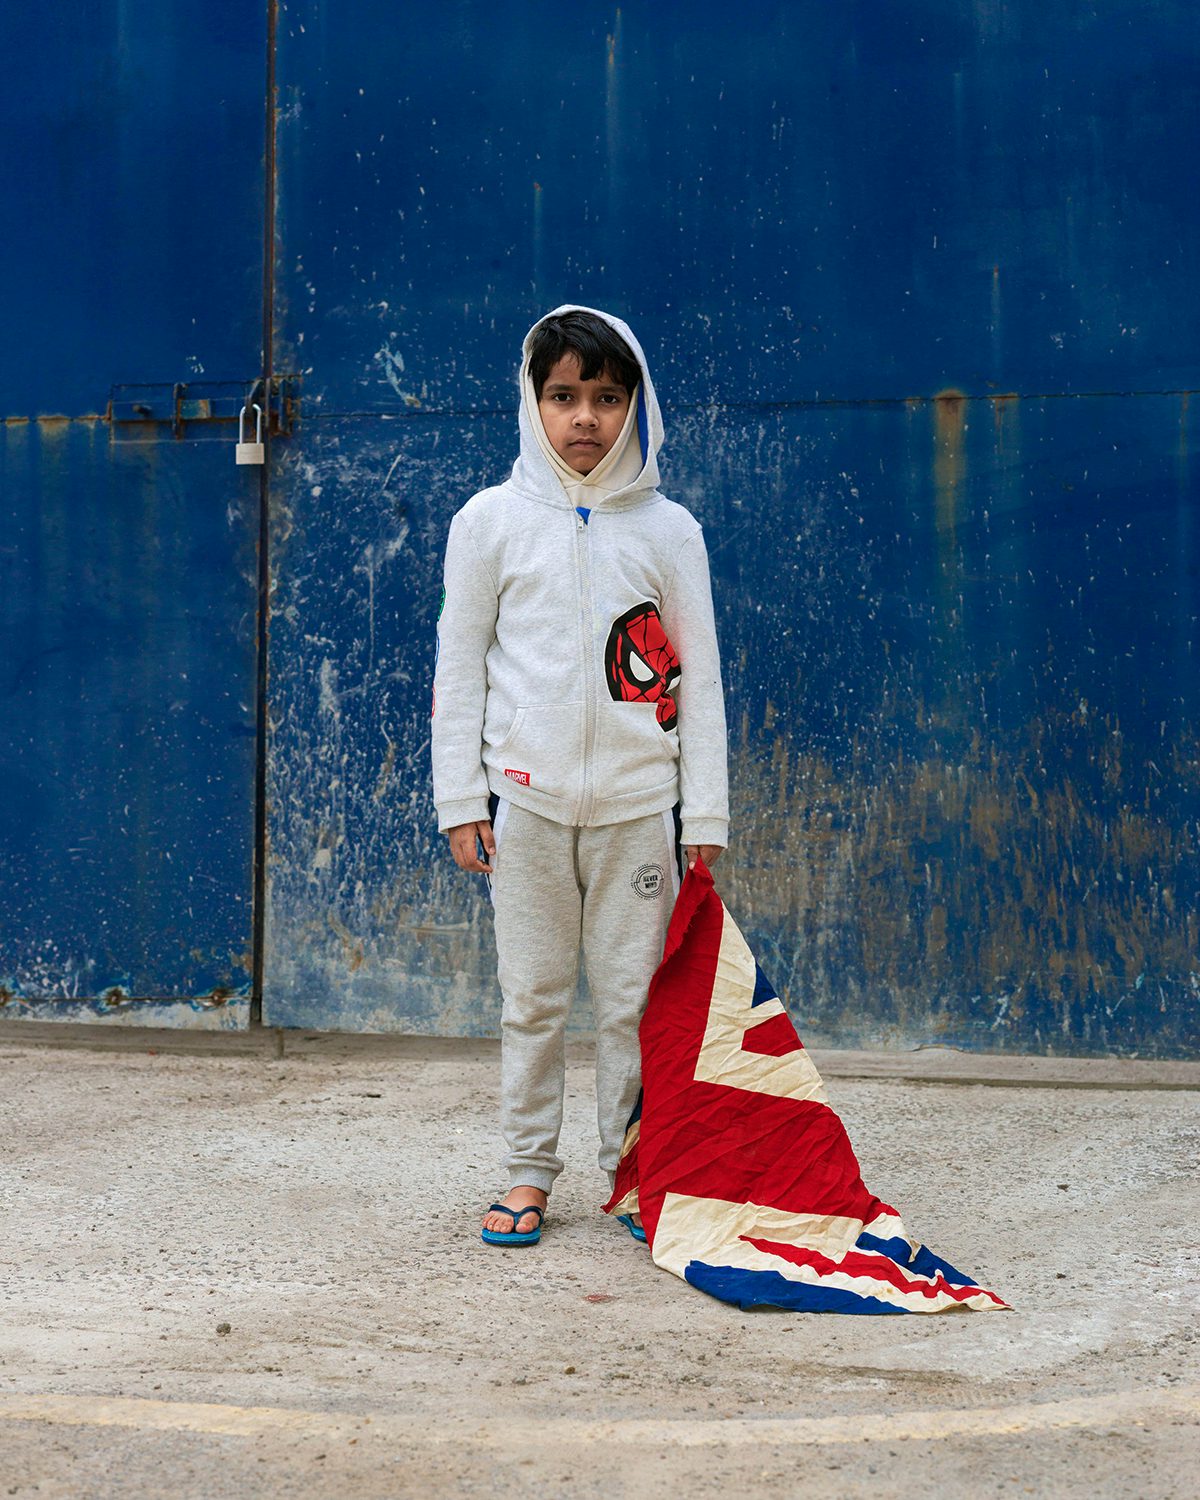 Image shows a young boy wearing a Spiderman hoodie holding a Union Jack flag, taken from Kavi Pujara's book This Golden Mile